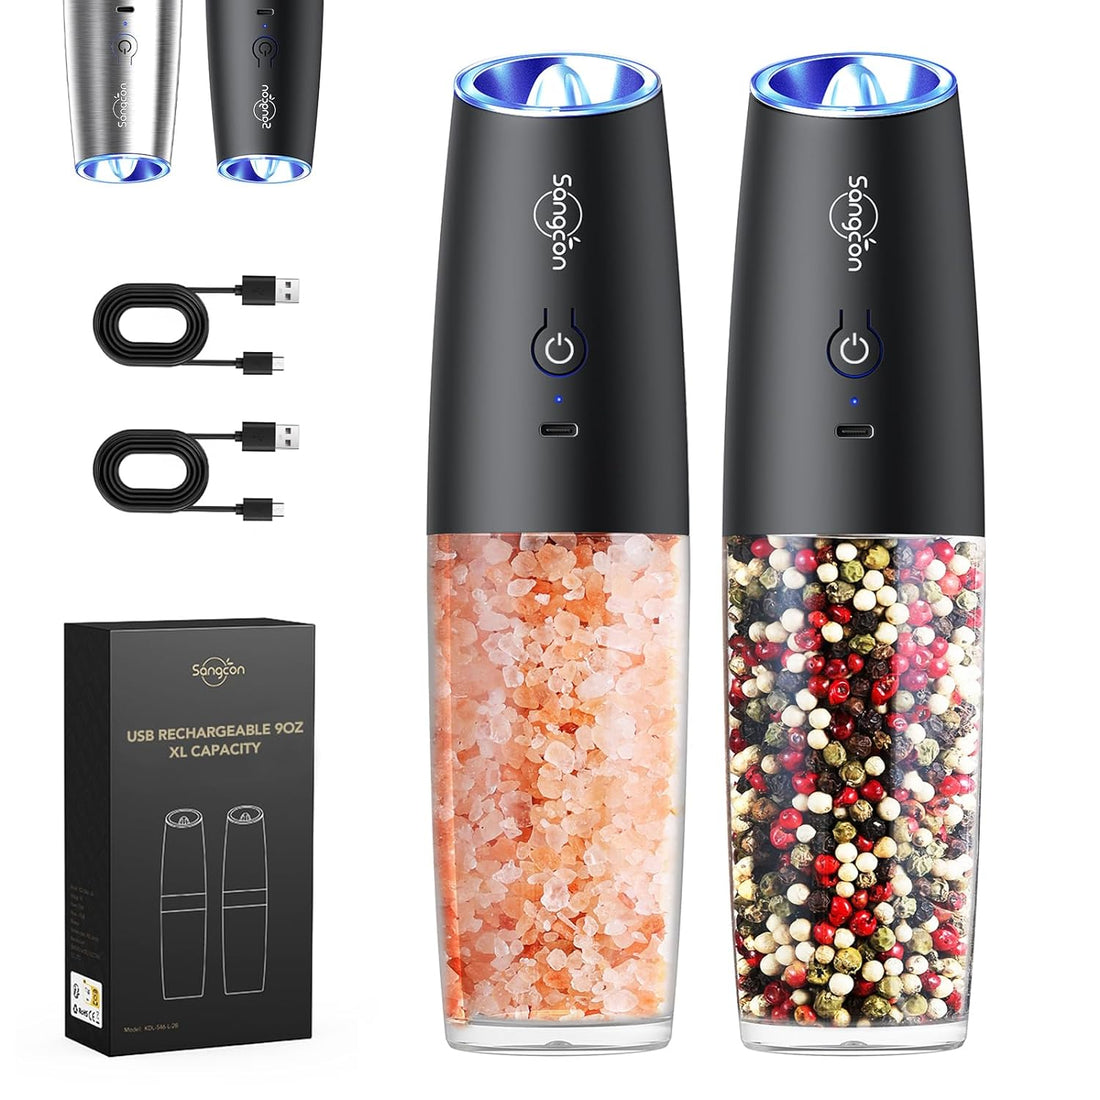 𝐔𝐩𝐠𝐫𝐚𝐝𝐞𝐝 Rechargeable 9oz Sangcon Gravity Electric Salt and Pepper Grinder Set - XL Capacity -No Battery Needed - LED Light One Hand Operation, Adjustable Coarseness Automatic Mill Shakers